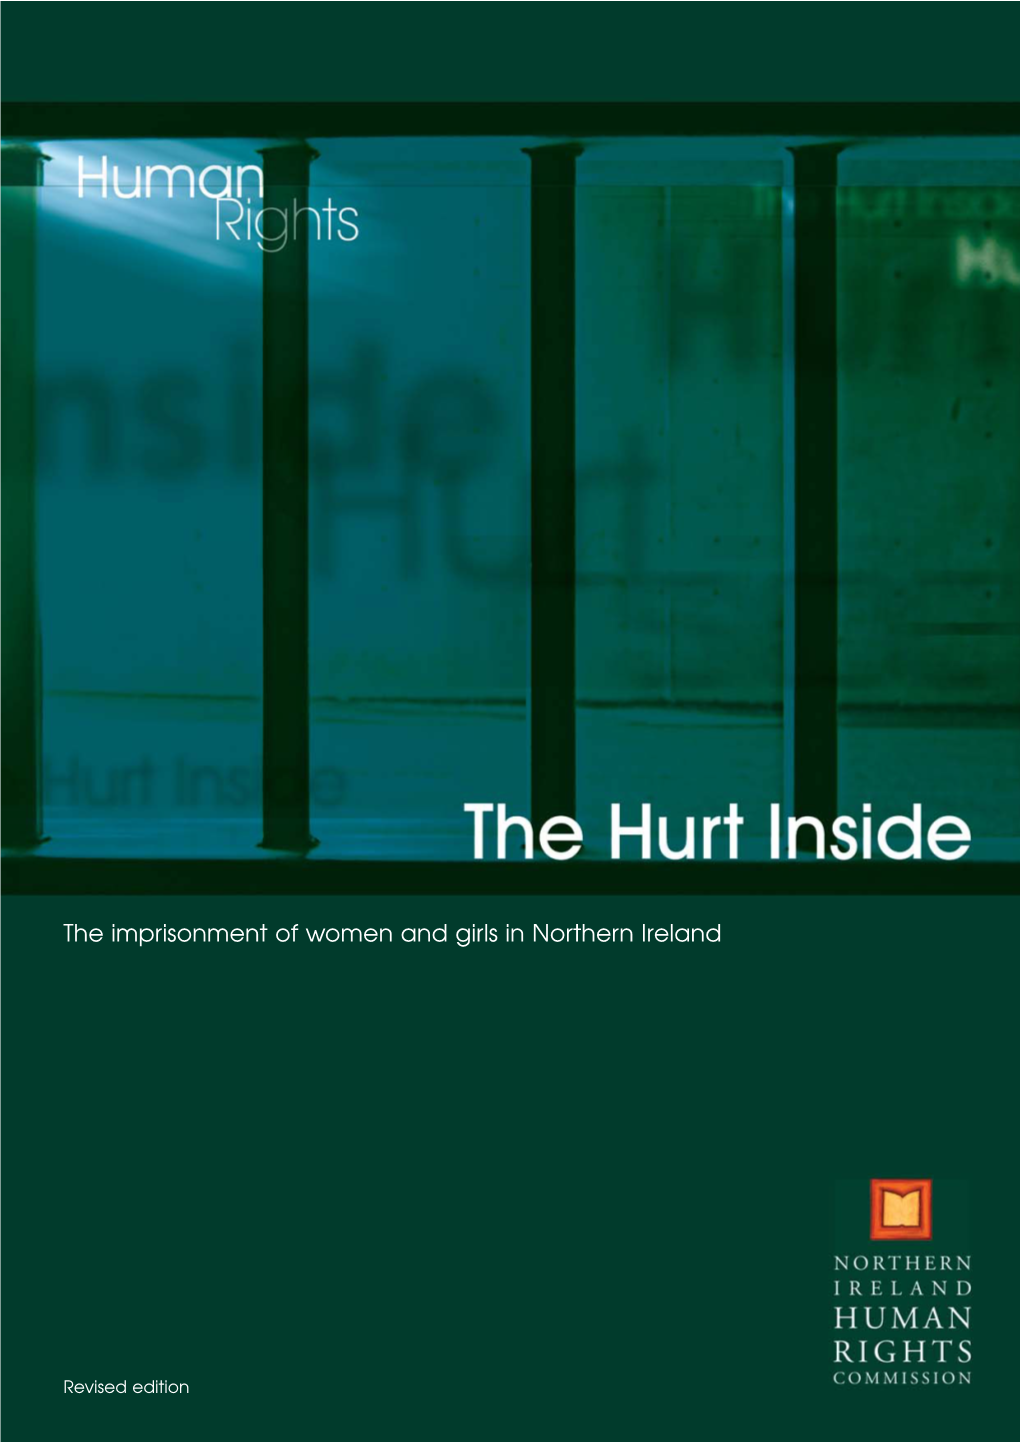 The Hurt Inside:The Imprisonment of Women and Girls in Northern